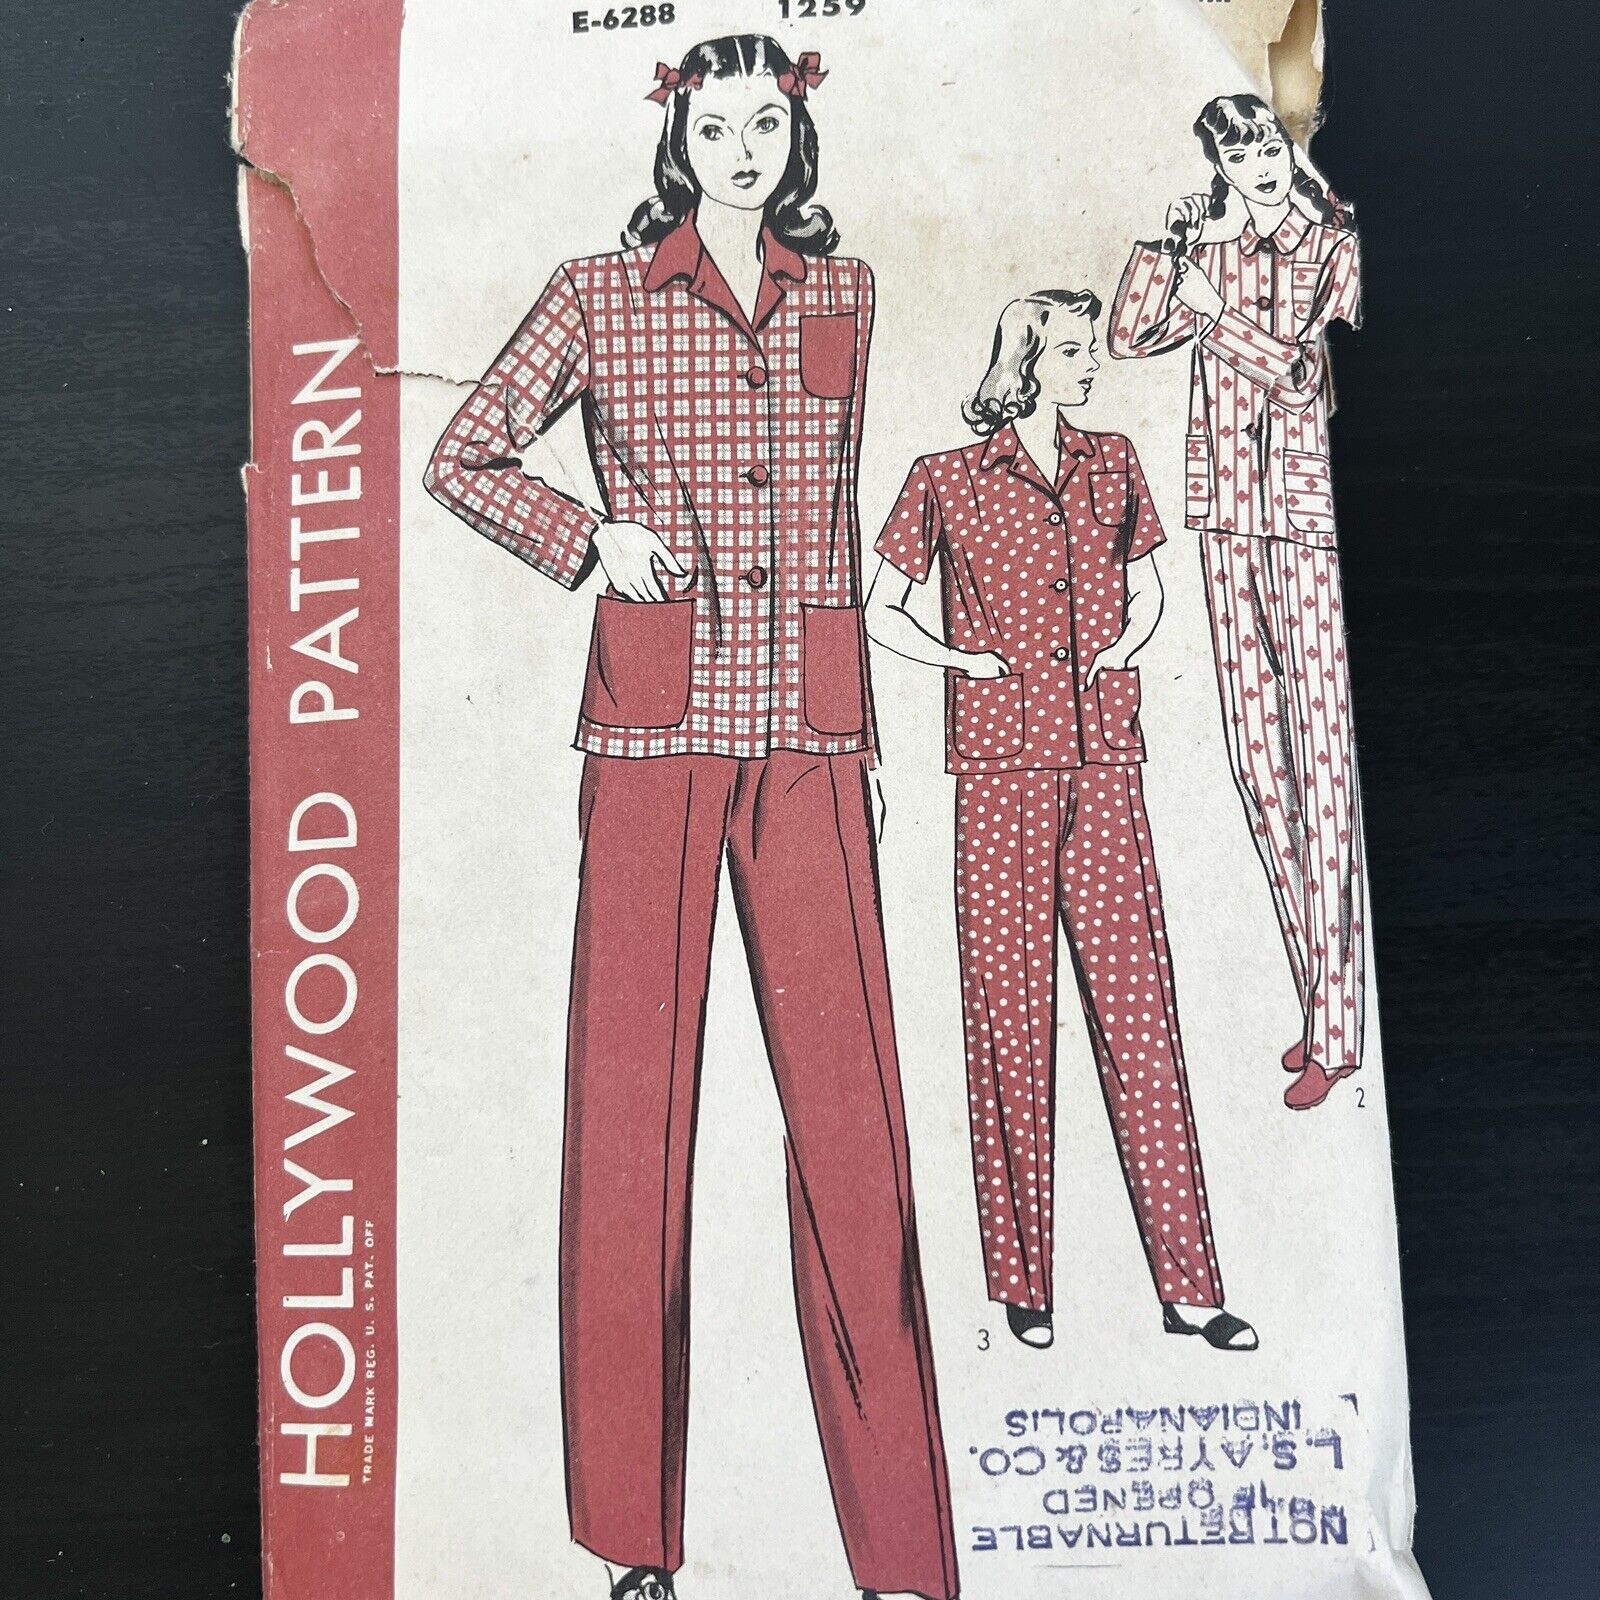 Vintage 1940s Hollywood 1259 Two Piece Pajamas WWII Shirt Sewing Pattern 20 CUT